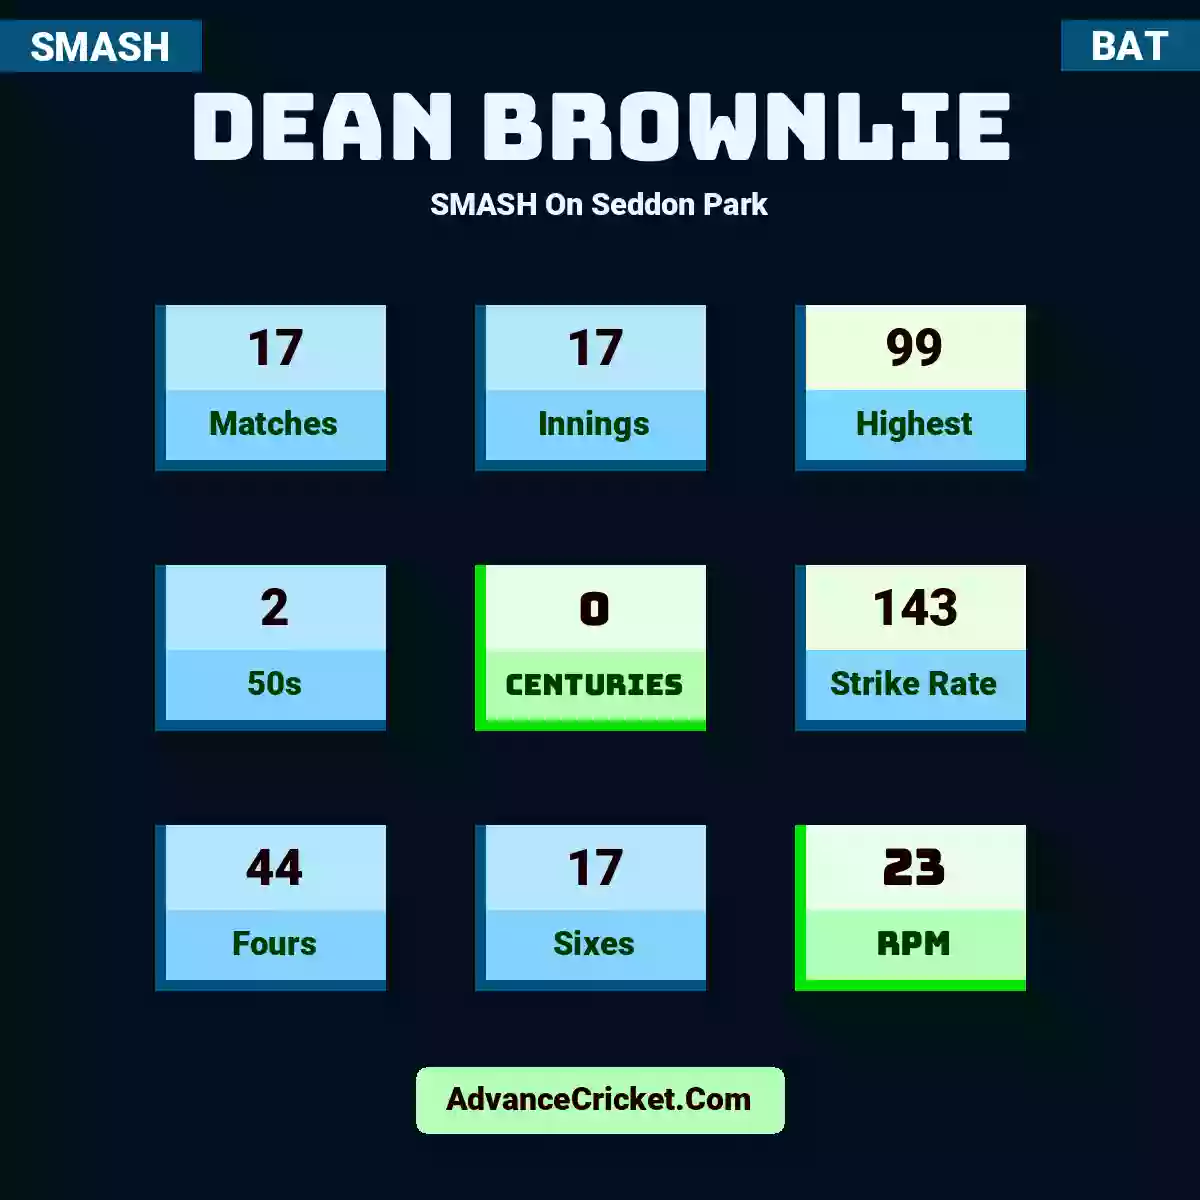 Dean Brownlie SMASH  On Seddon Park, Dean Brownlie played 17 matches, scored 99 runs as highest, 2 half-centuries, and 0 centuries, with a strike rate of 143. D.Brownlie hit 44 fours and 17 sixes, with an RPM of 23.